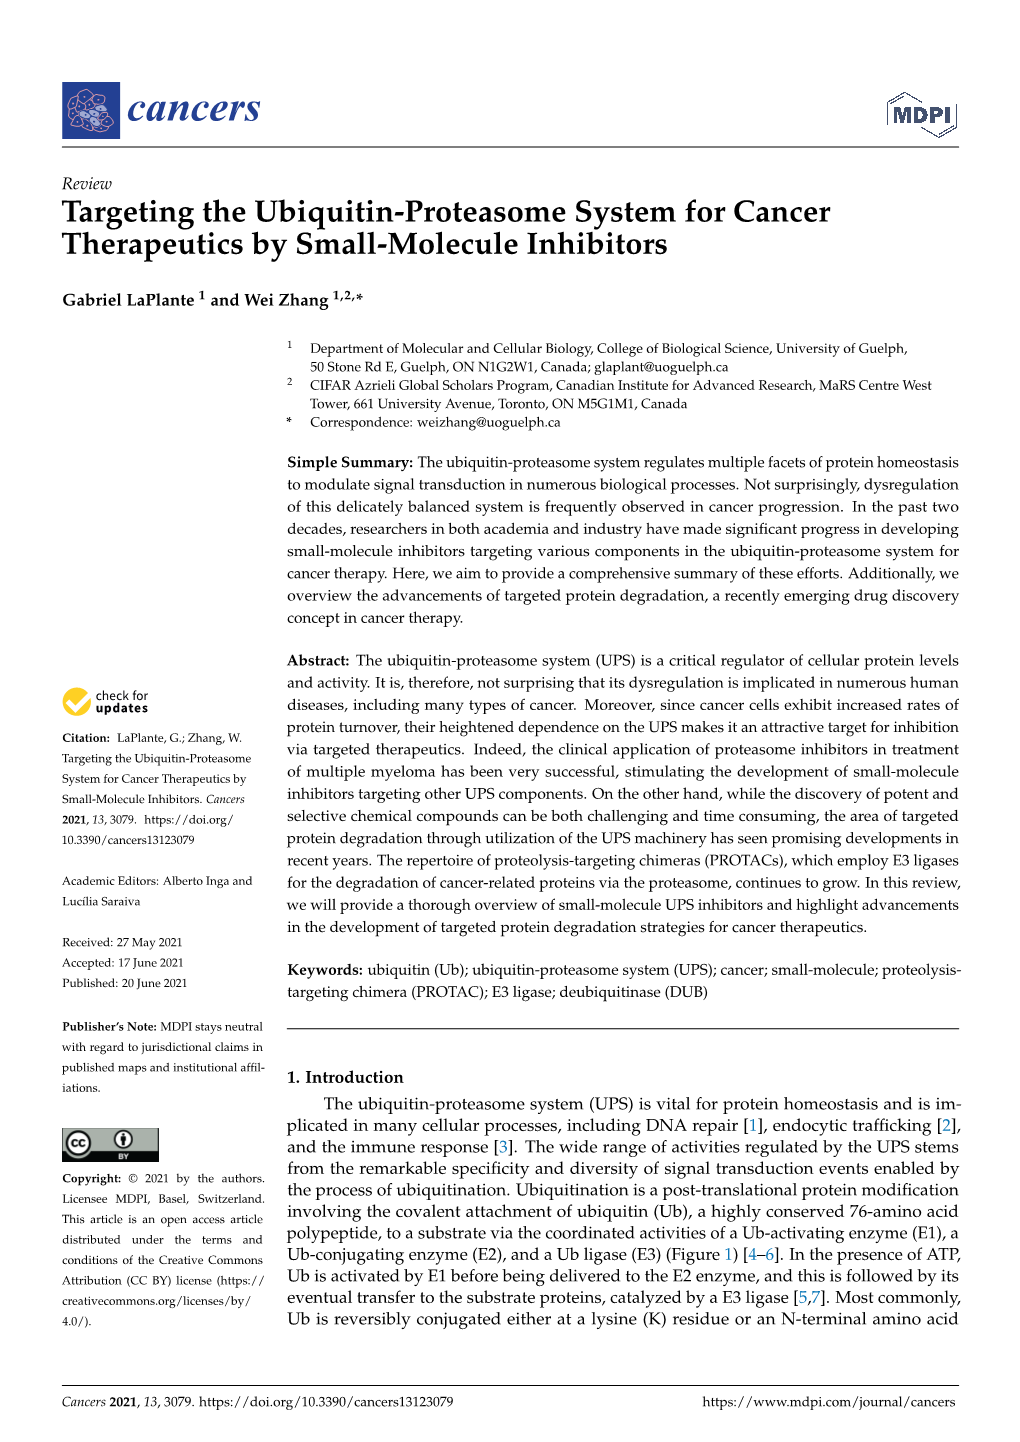 Targeting the Ubiquitin-Proteasome System for Cancer Therapeutics by Small-Molecule Inhibitors